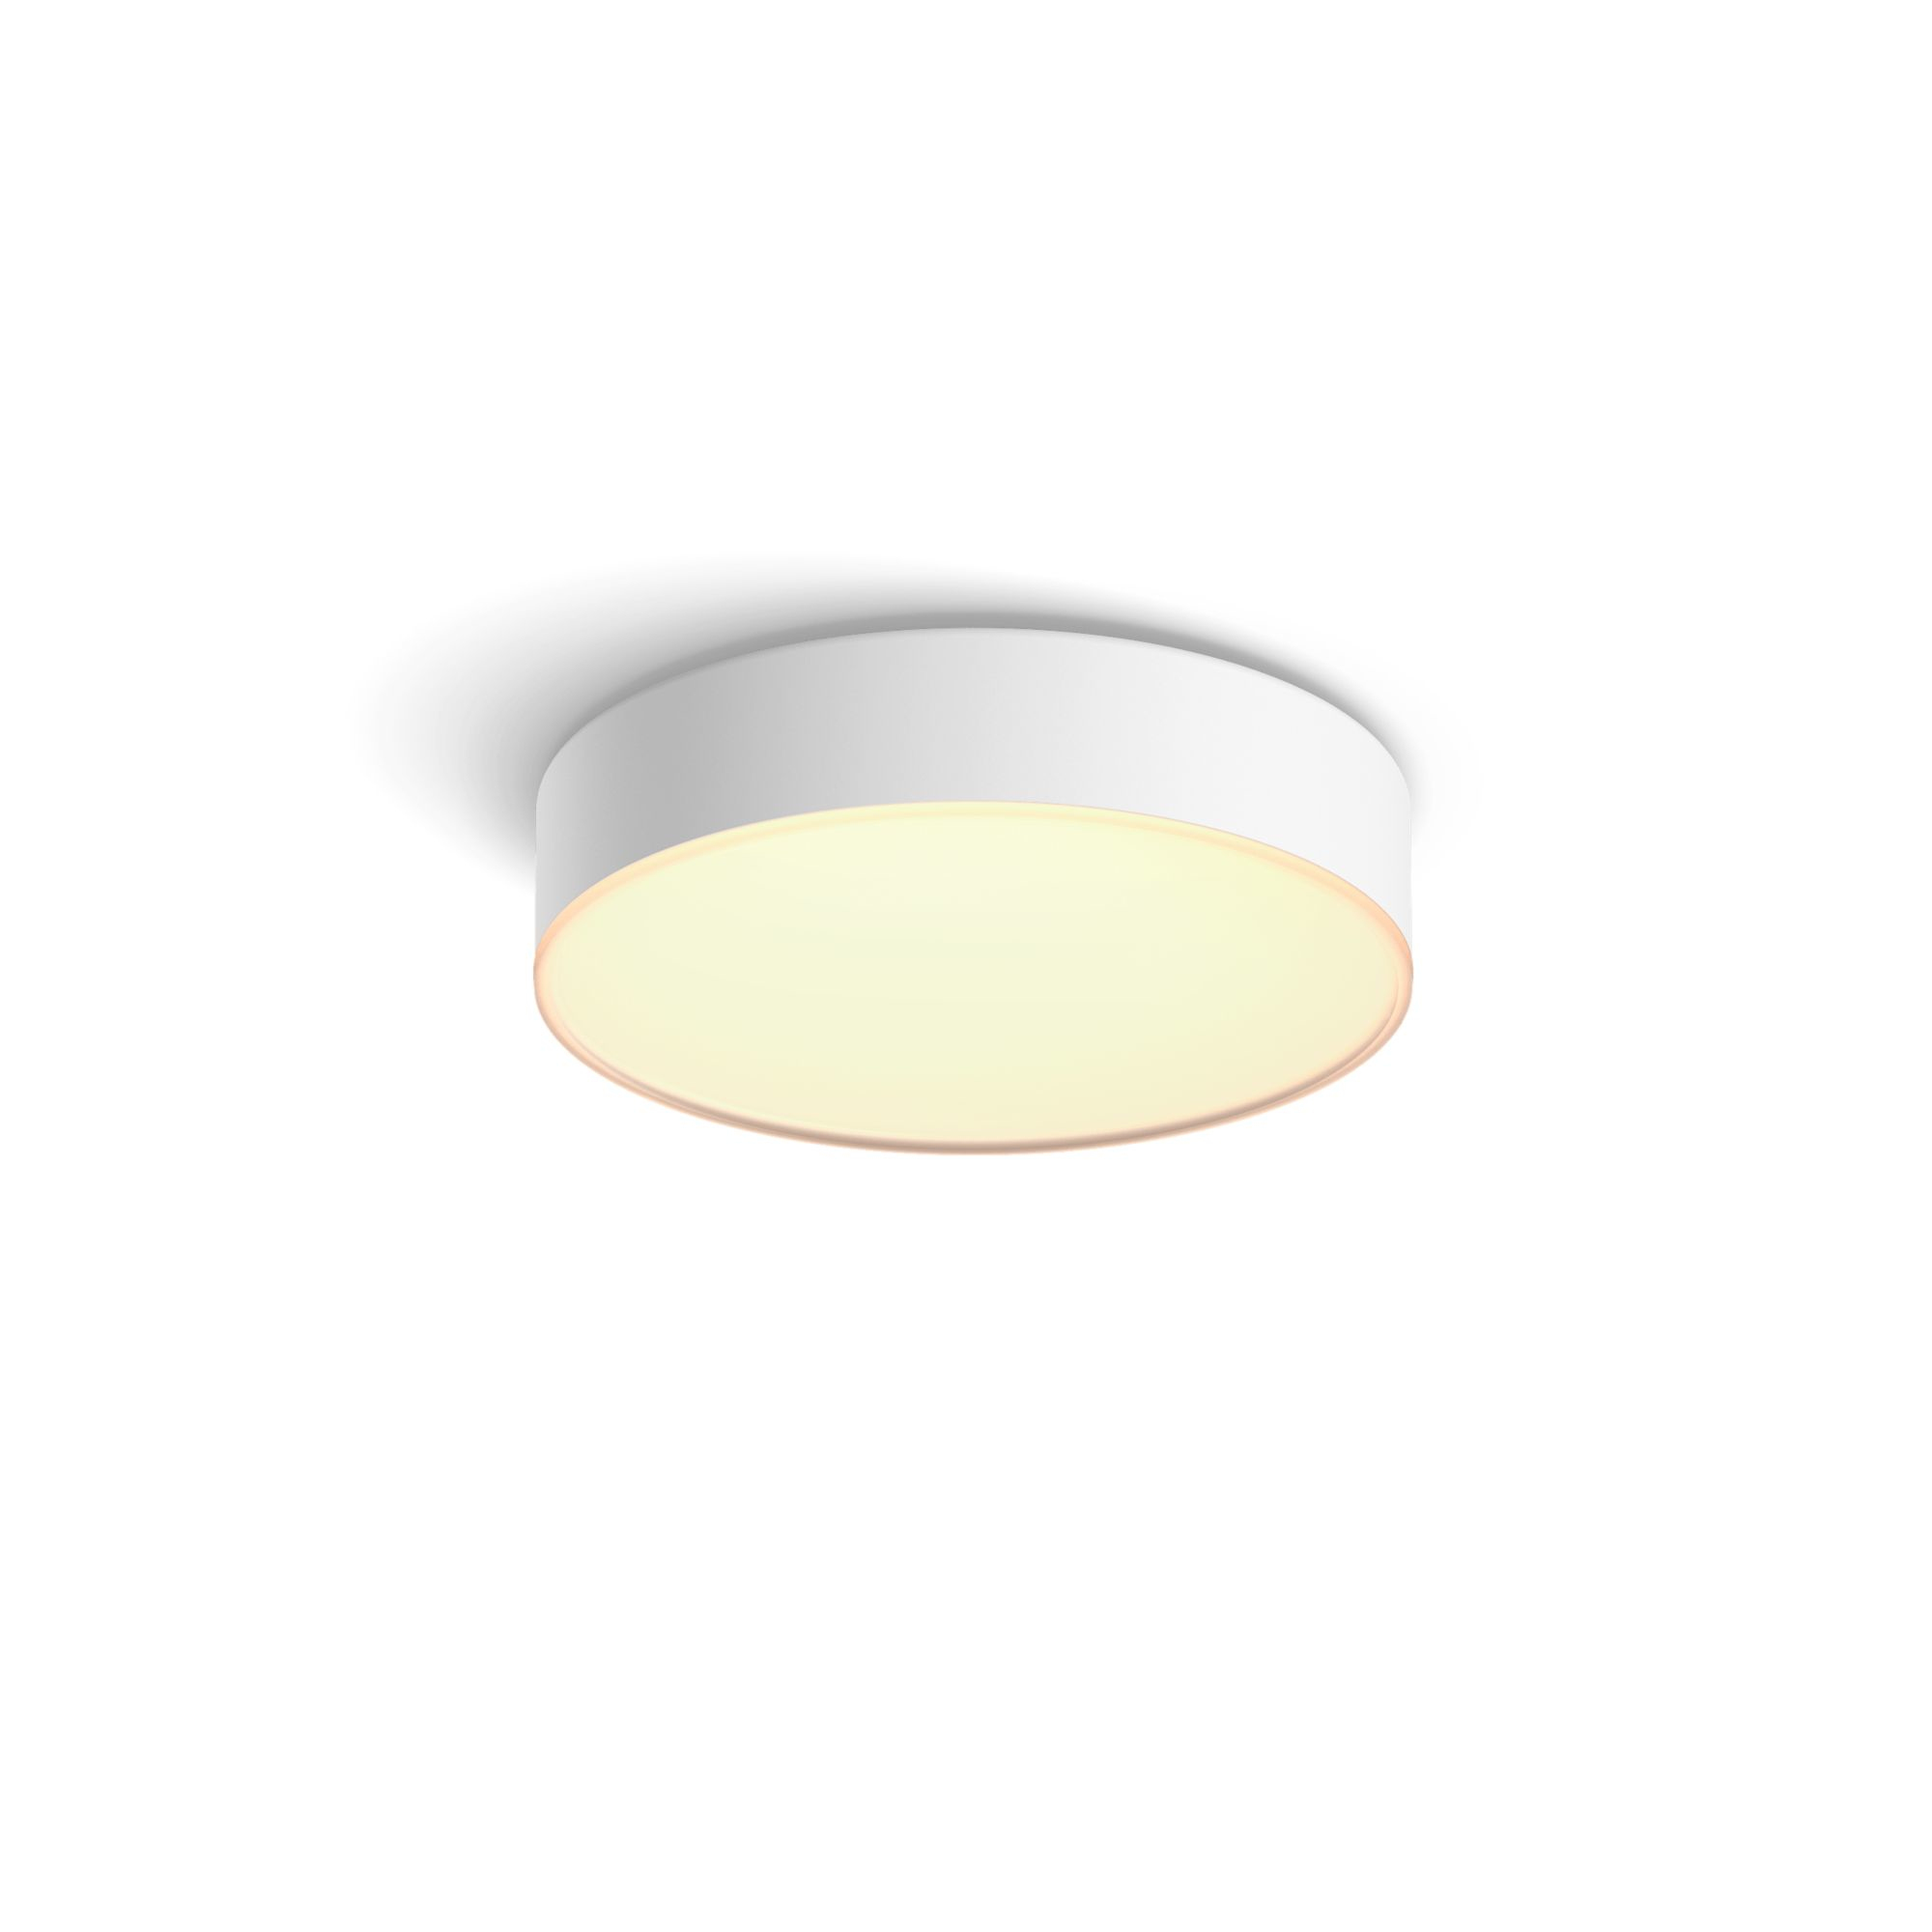 Philips by Signify Enrave kleine plafondlamp